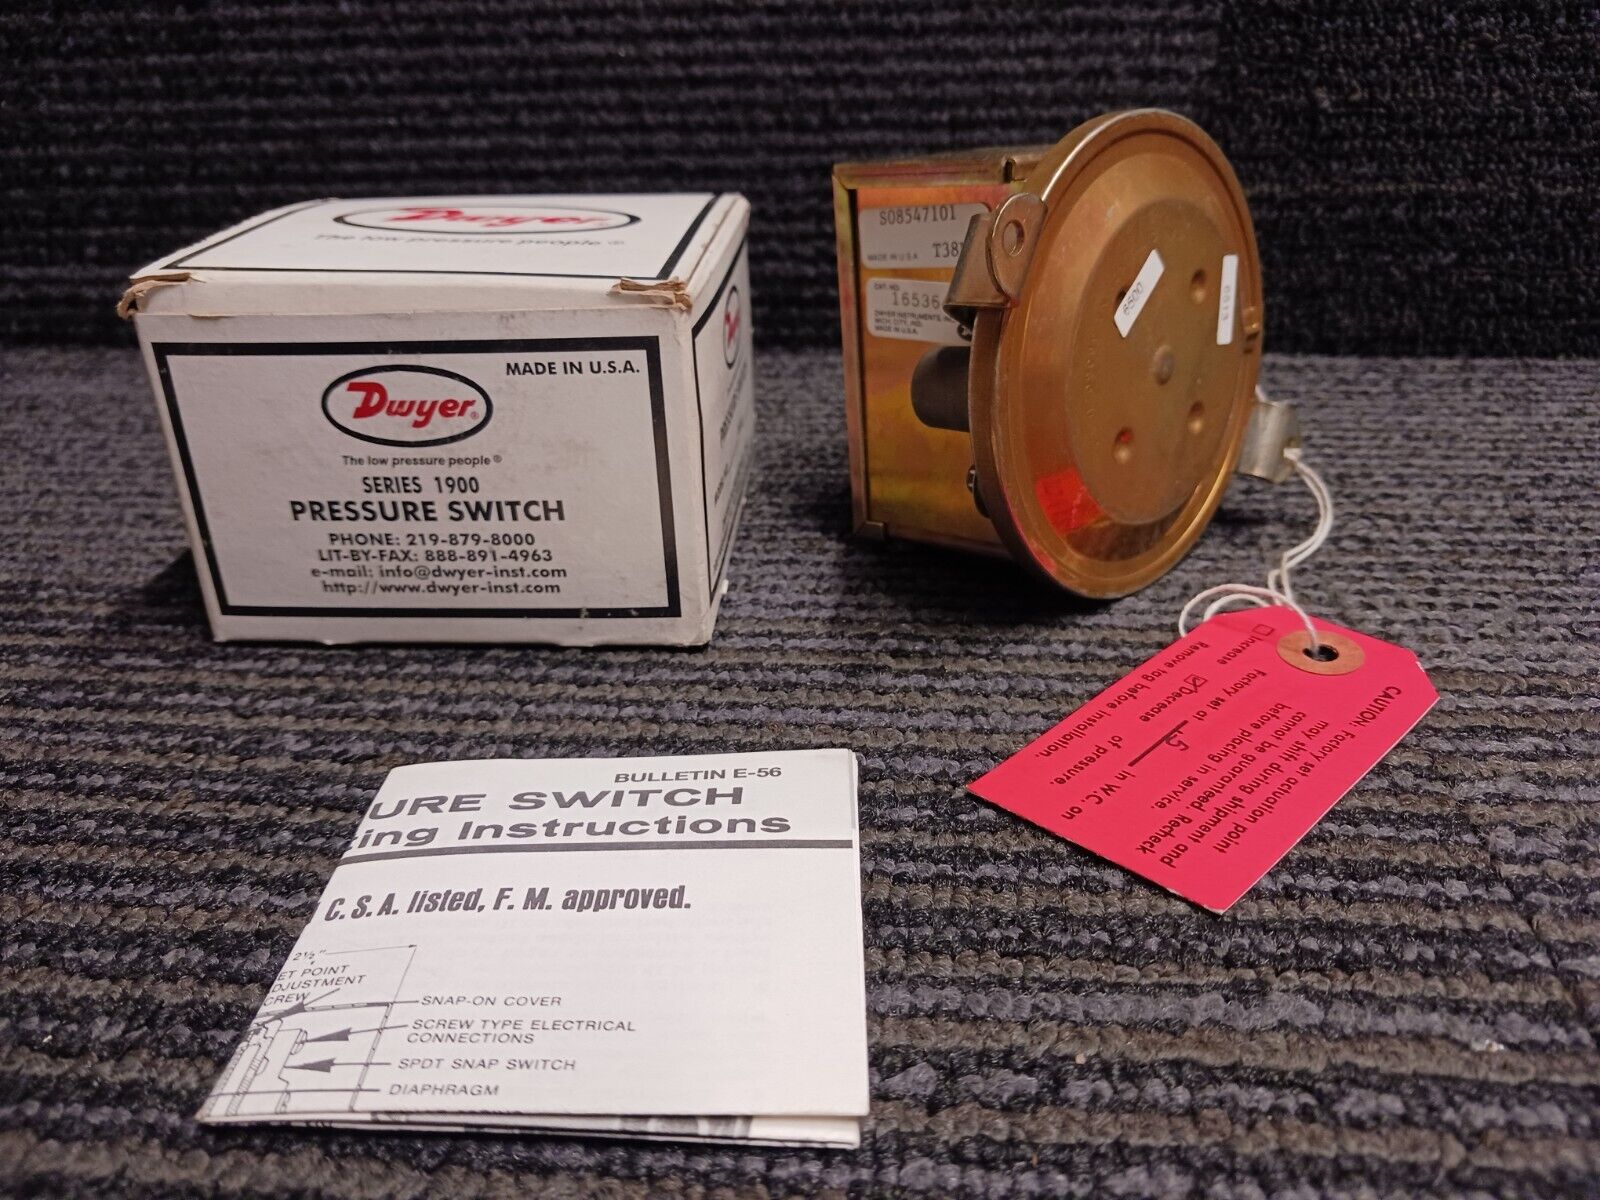 DWYER 1910-1 SERIES 1900 PRESSURE SWITCH - New old stock.